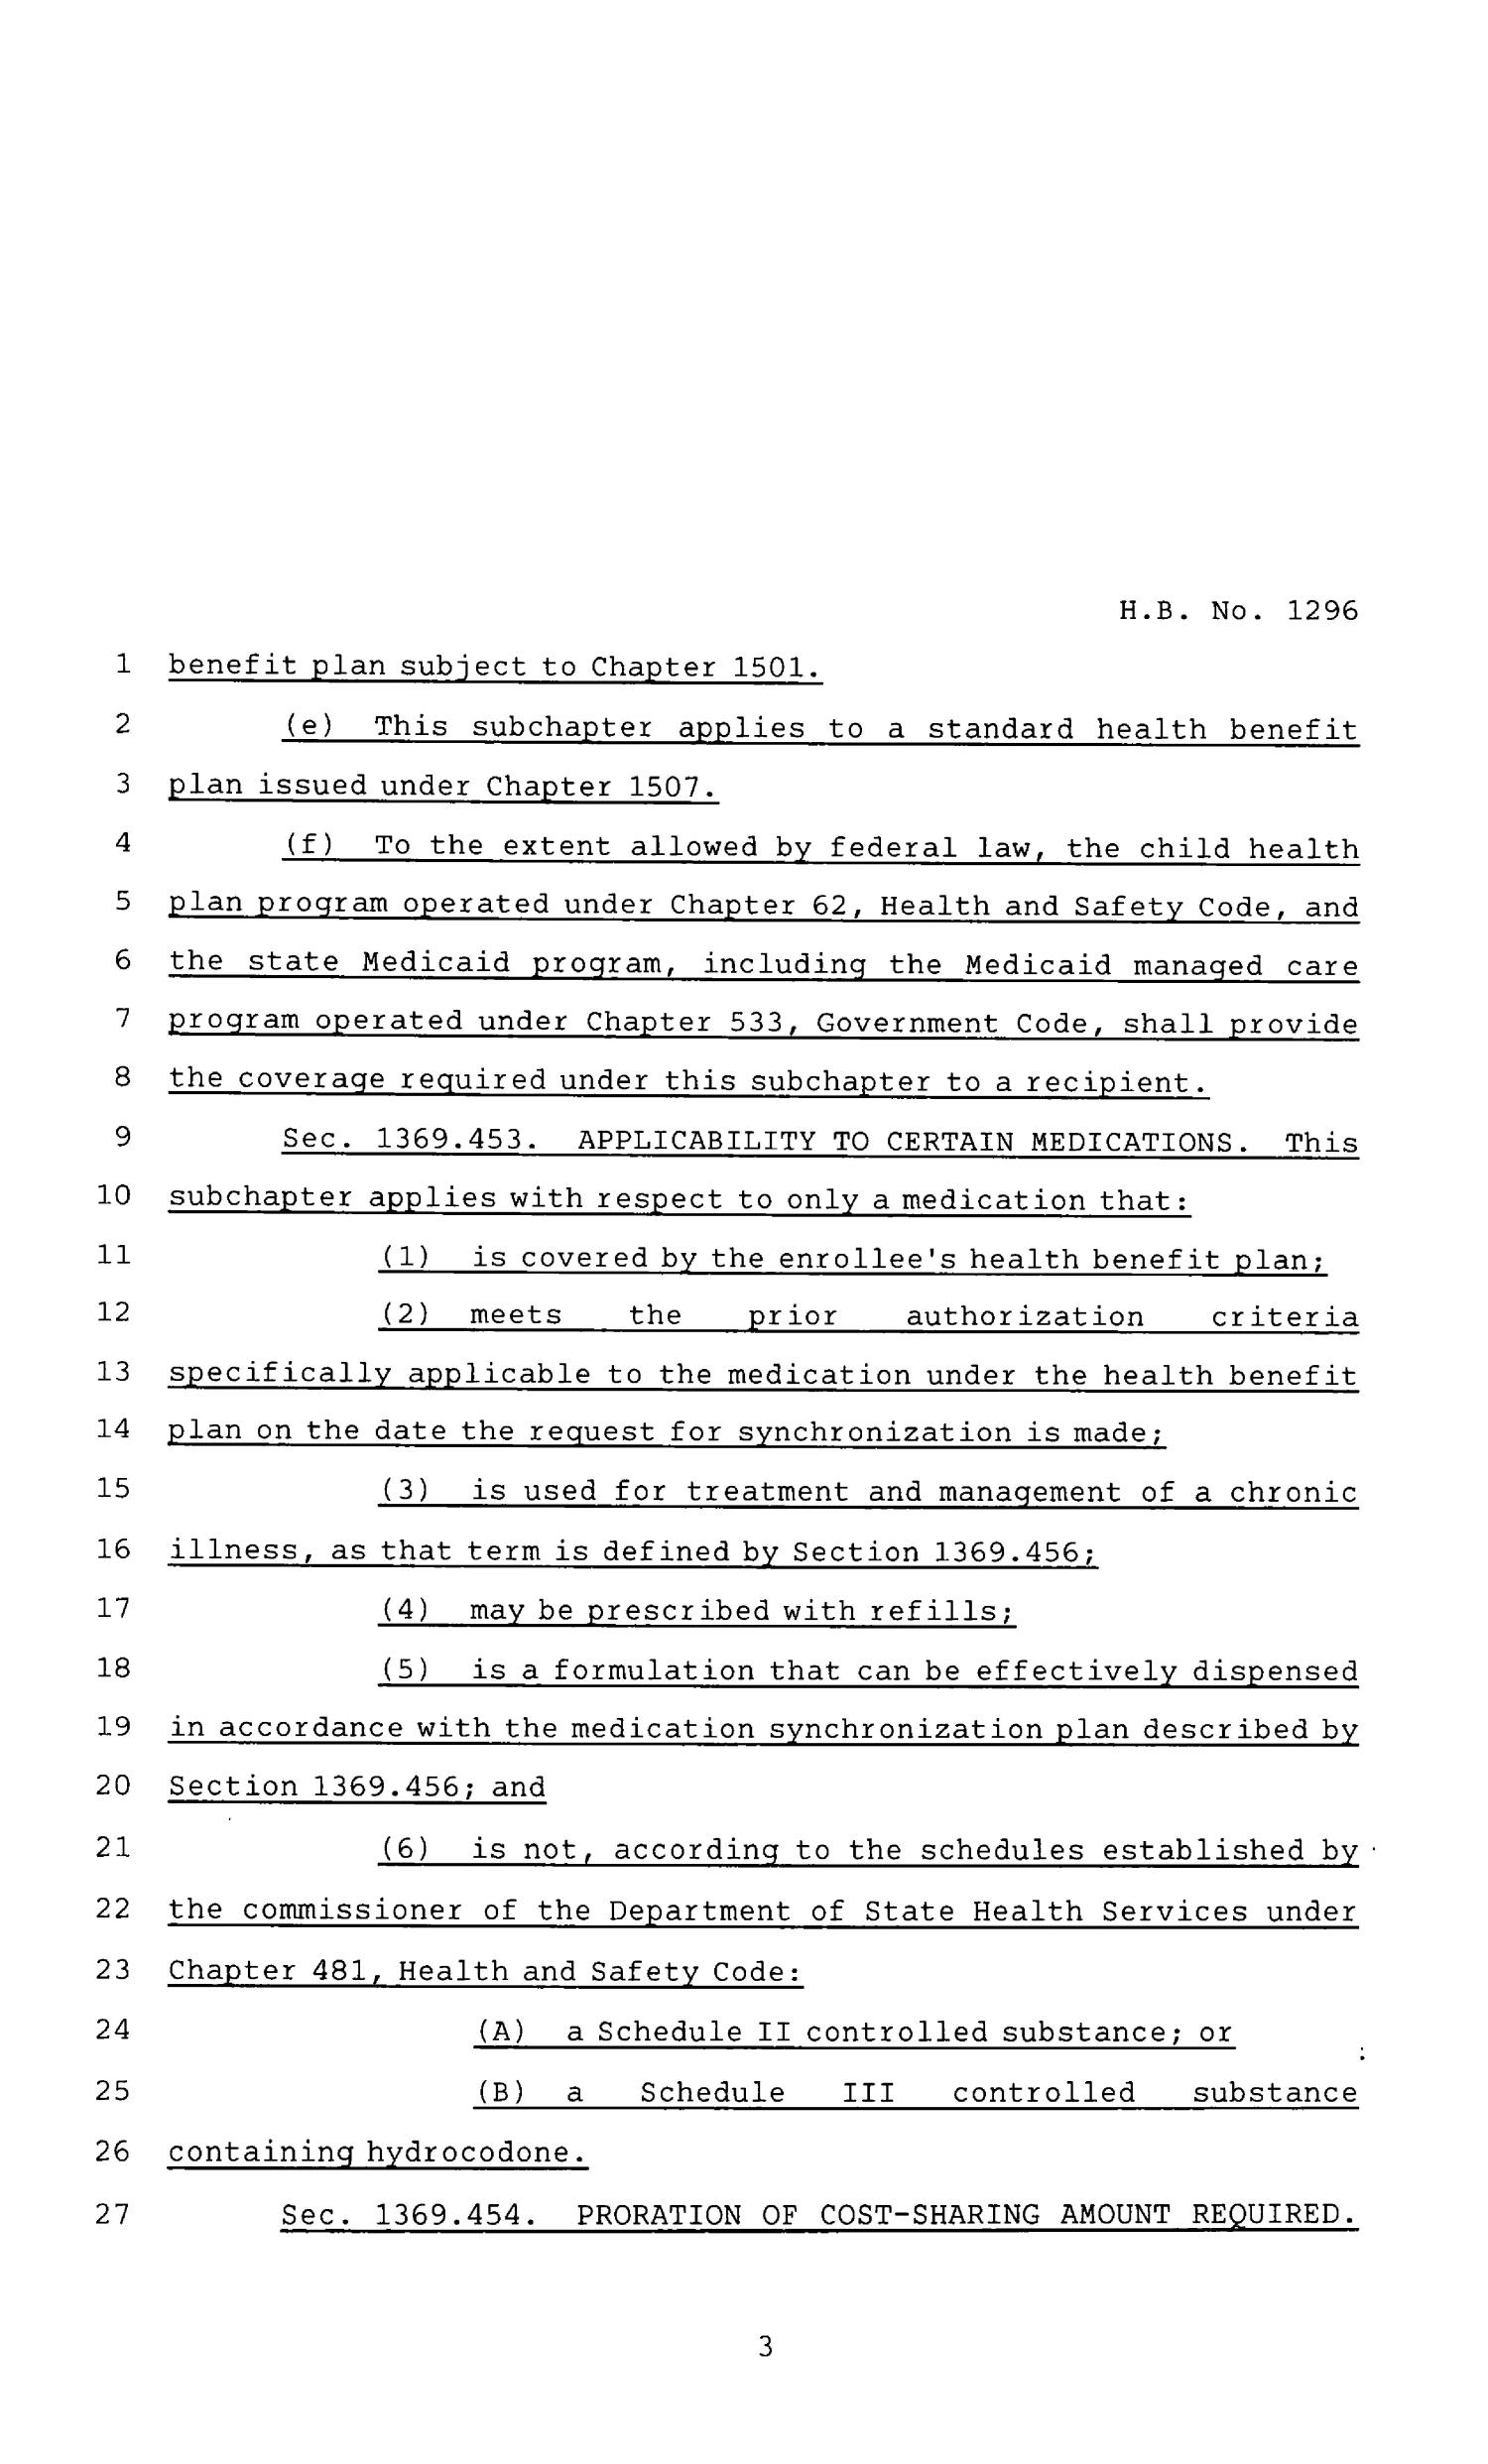 85th Texas Legislature, Regular Session, House Bill 1296, Chapter 1007
                                                
                                                    [Sequence #]: 3 of 10
                                                